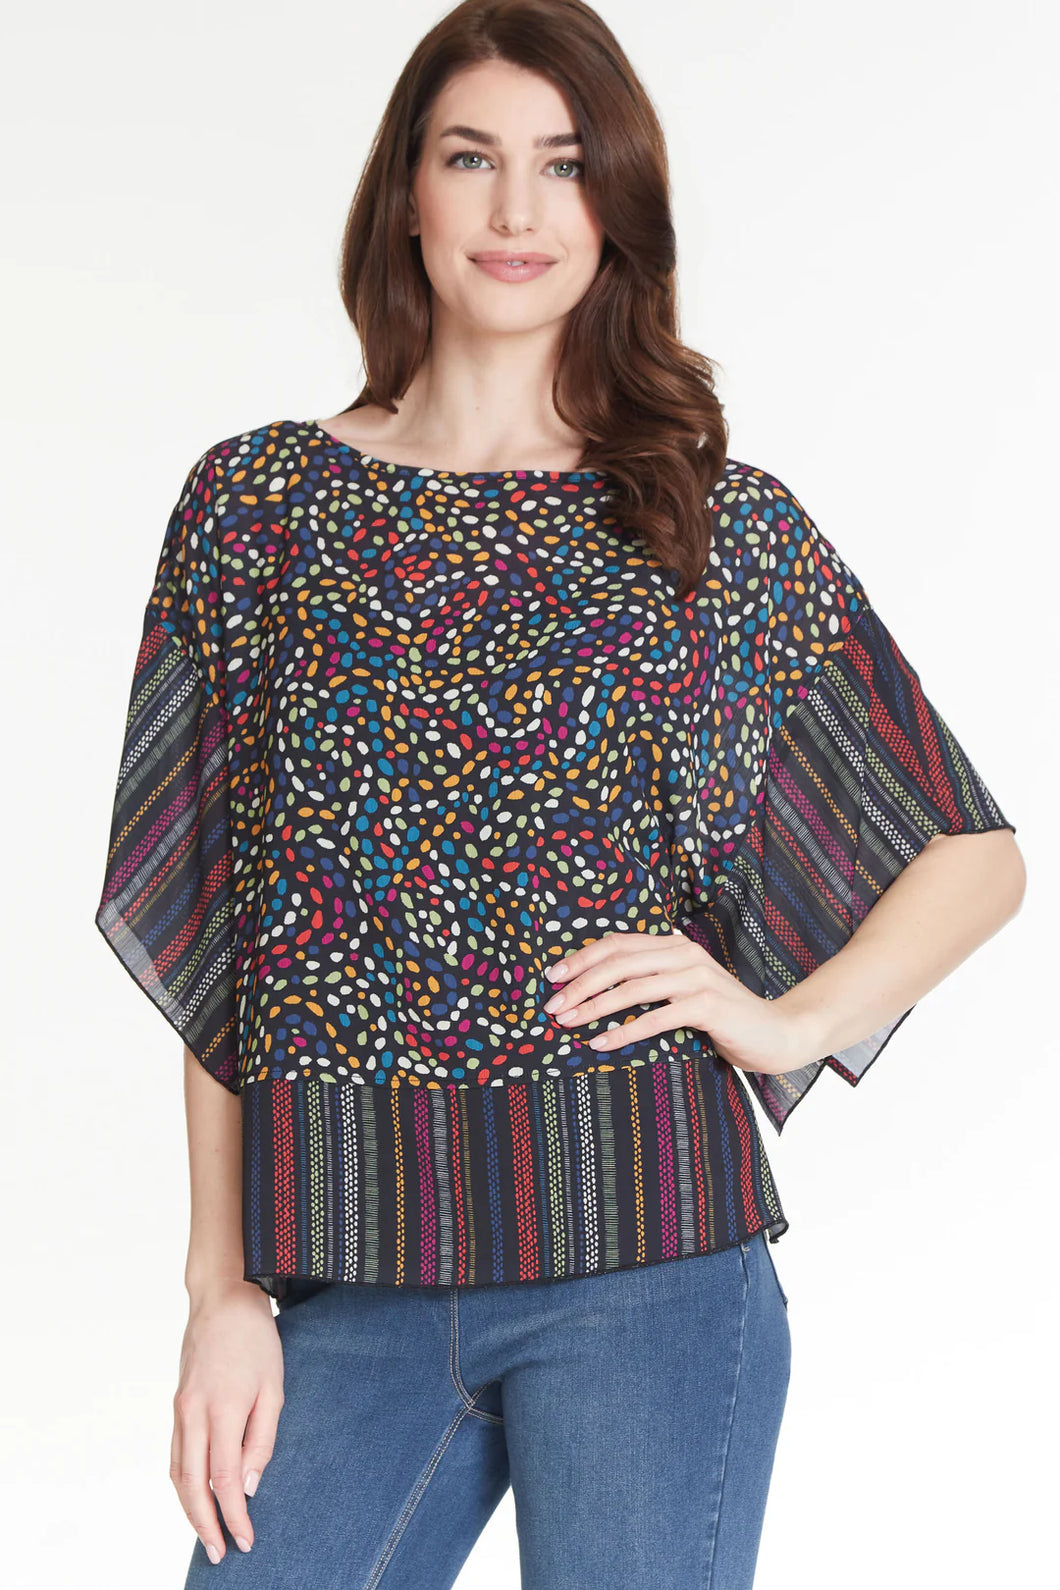 Multiples: Short Sleeve Multi Print Crinkle Poncho Top & Solid Knit Cami